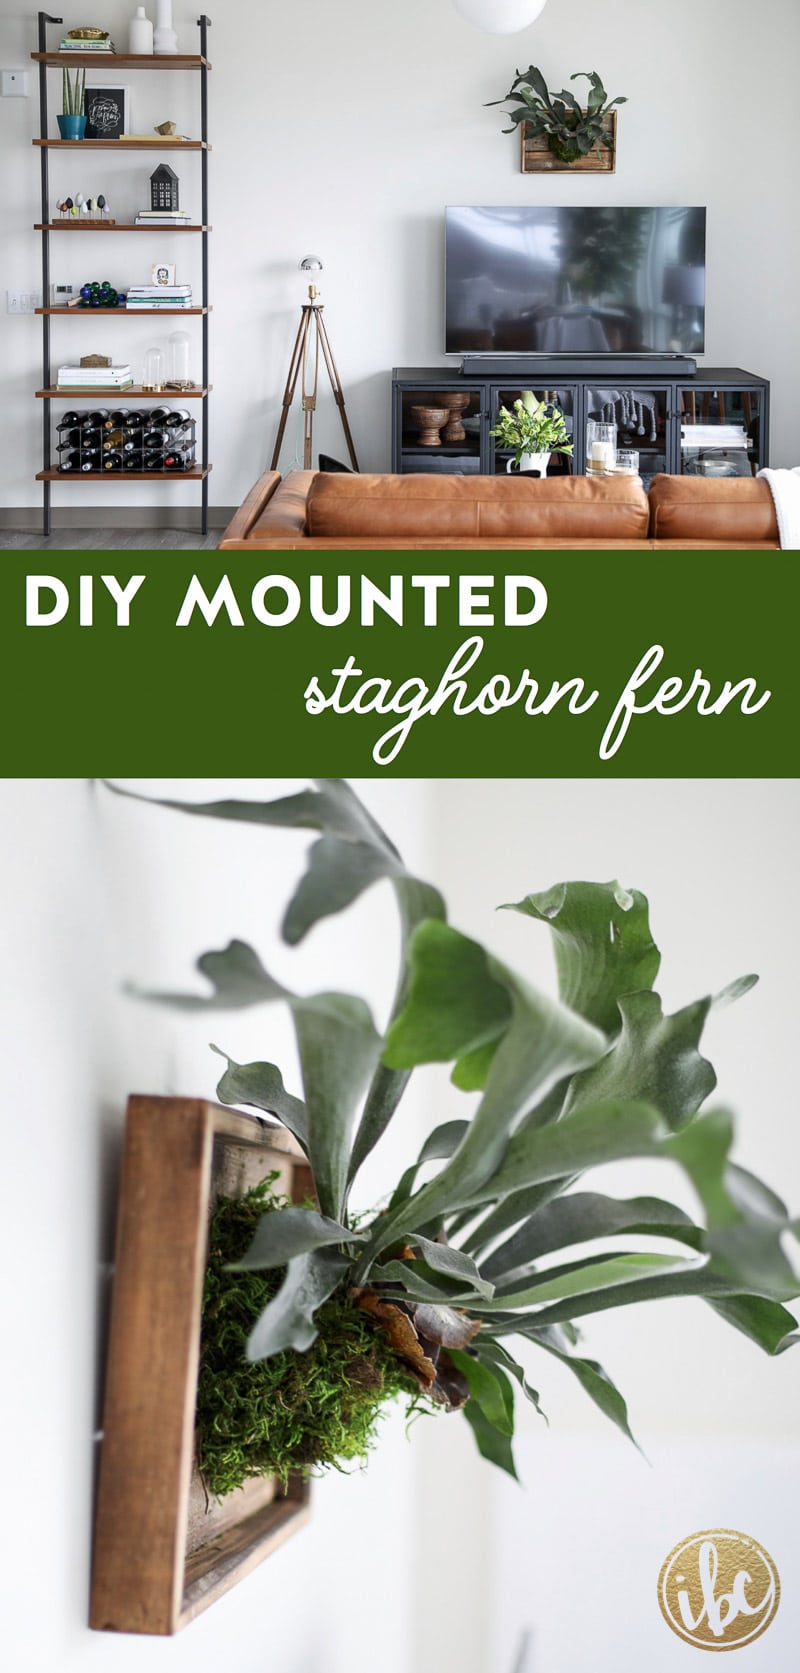 Learn how to make this DIY Mounted Staghorn Fern! #plant #diy #staghorn #fern